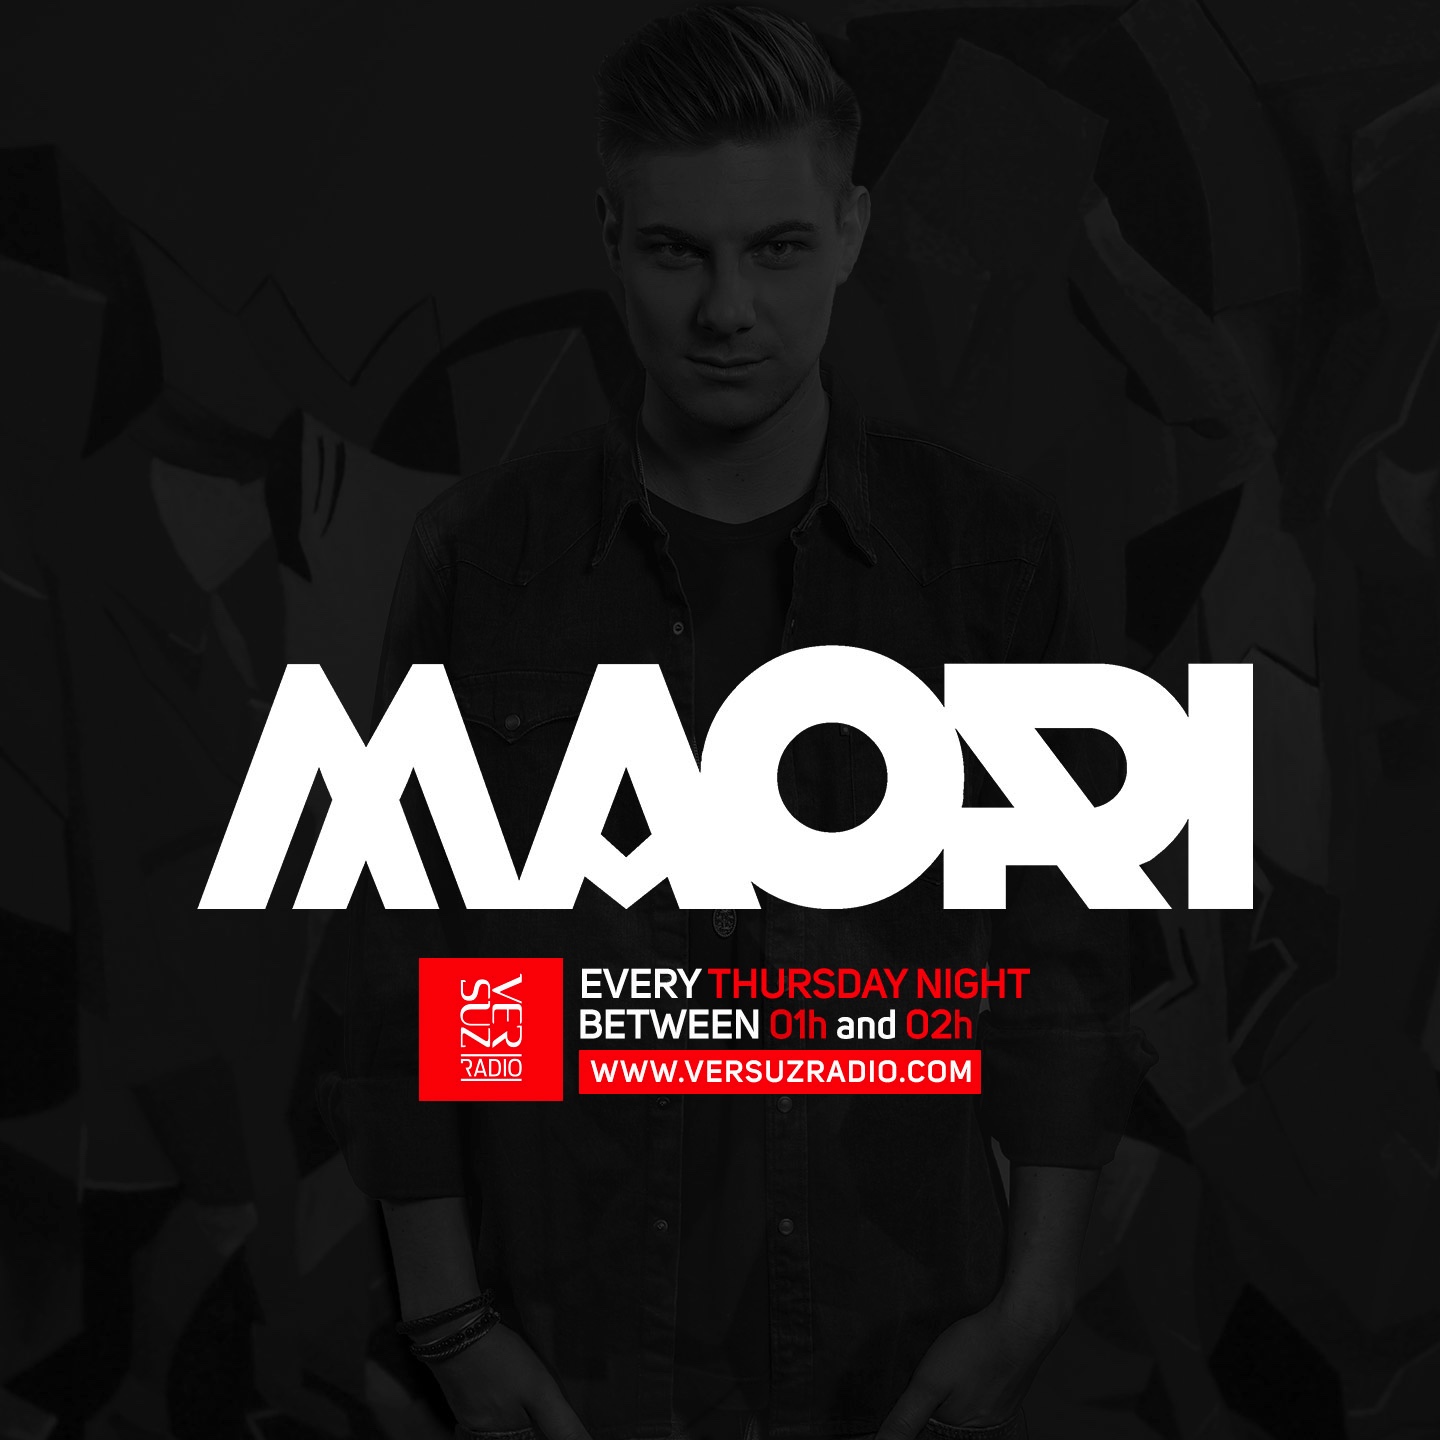 Clubhouse Radio by Maori - Episode #025